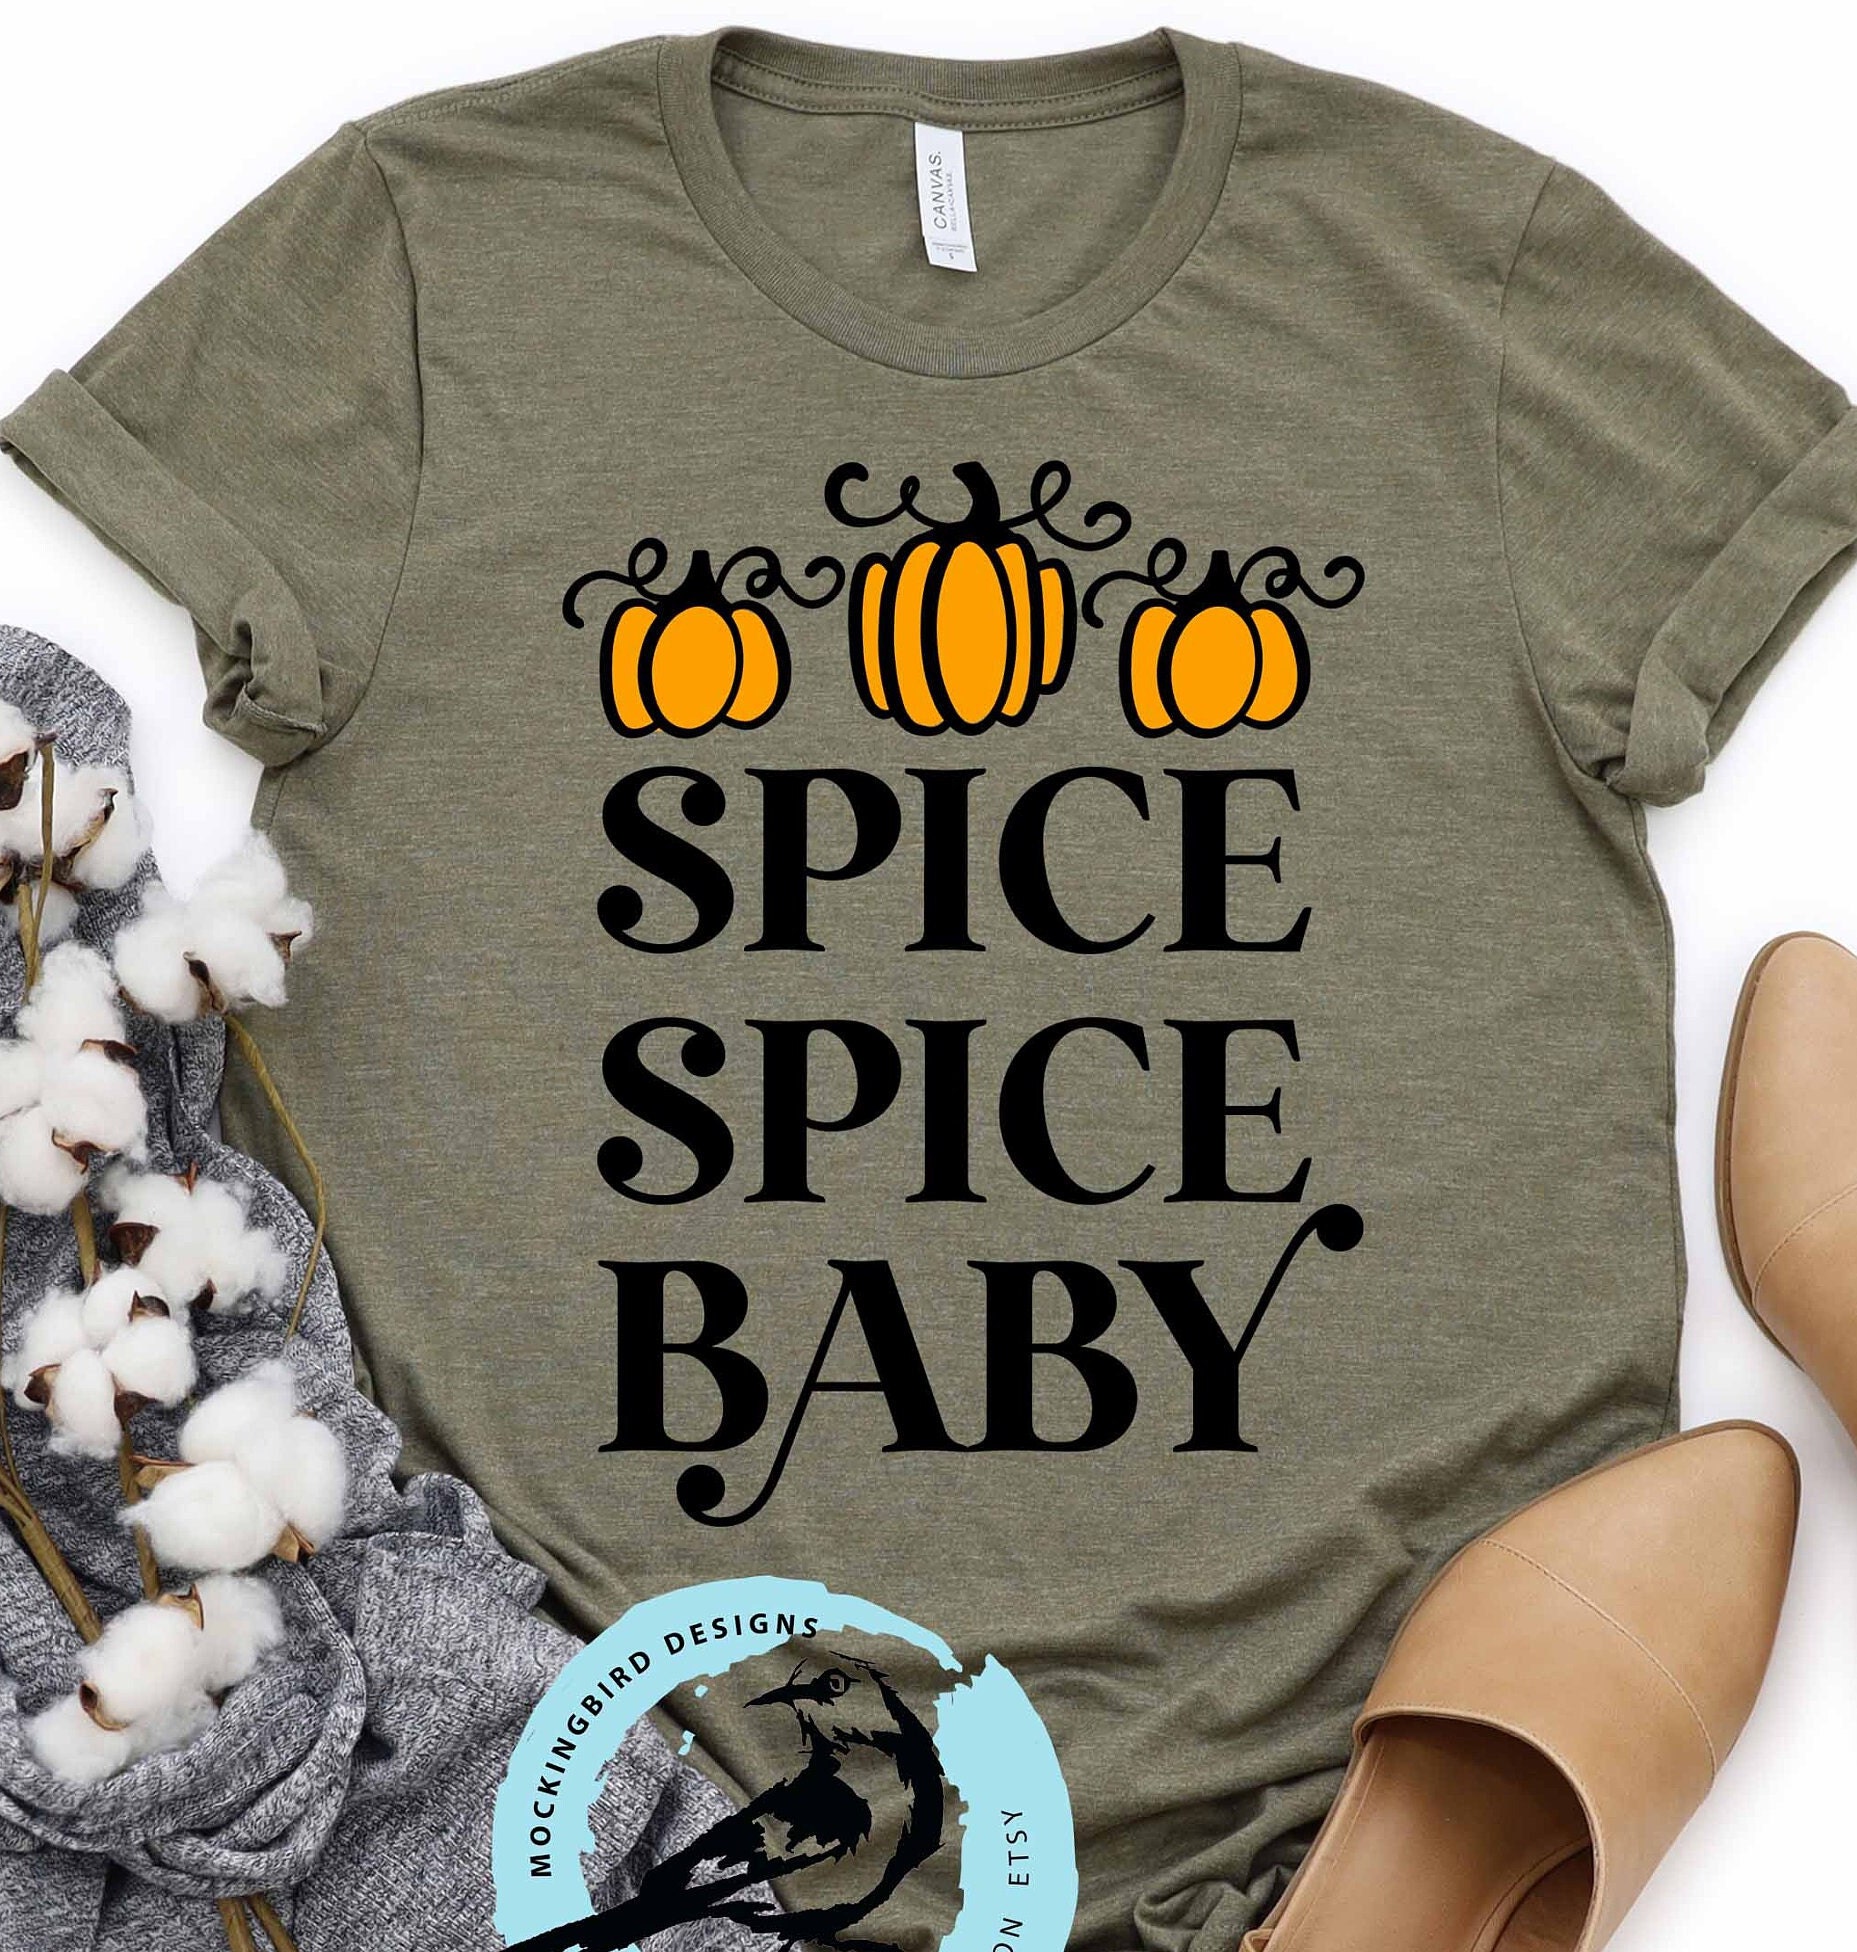 Spiced ice baby